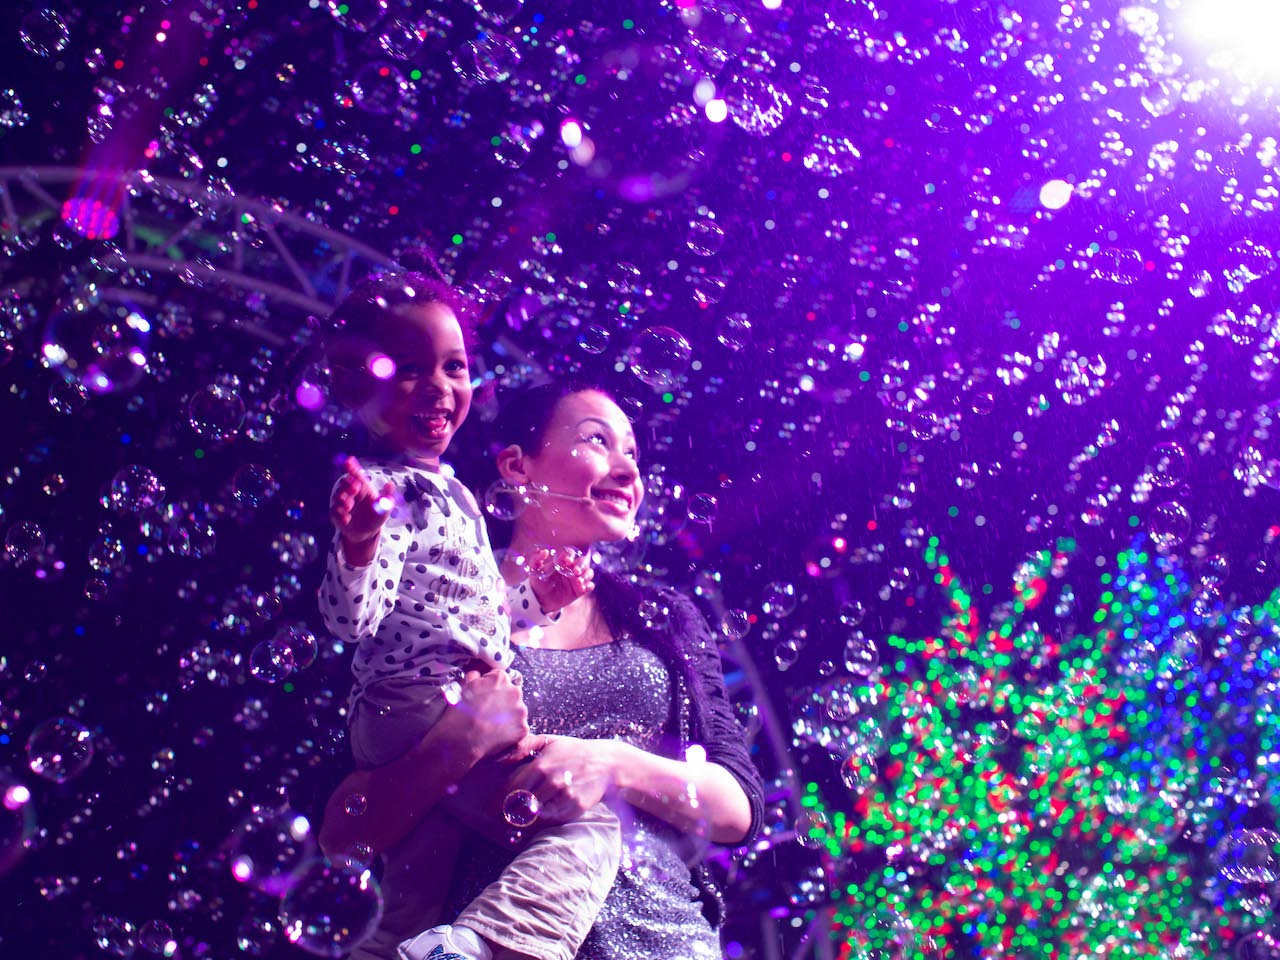 a mother and child surrounded but a cloud of bubbles